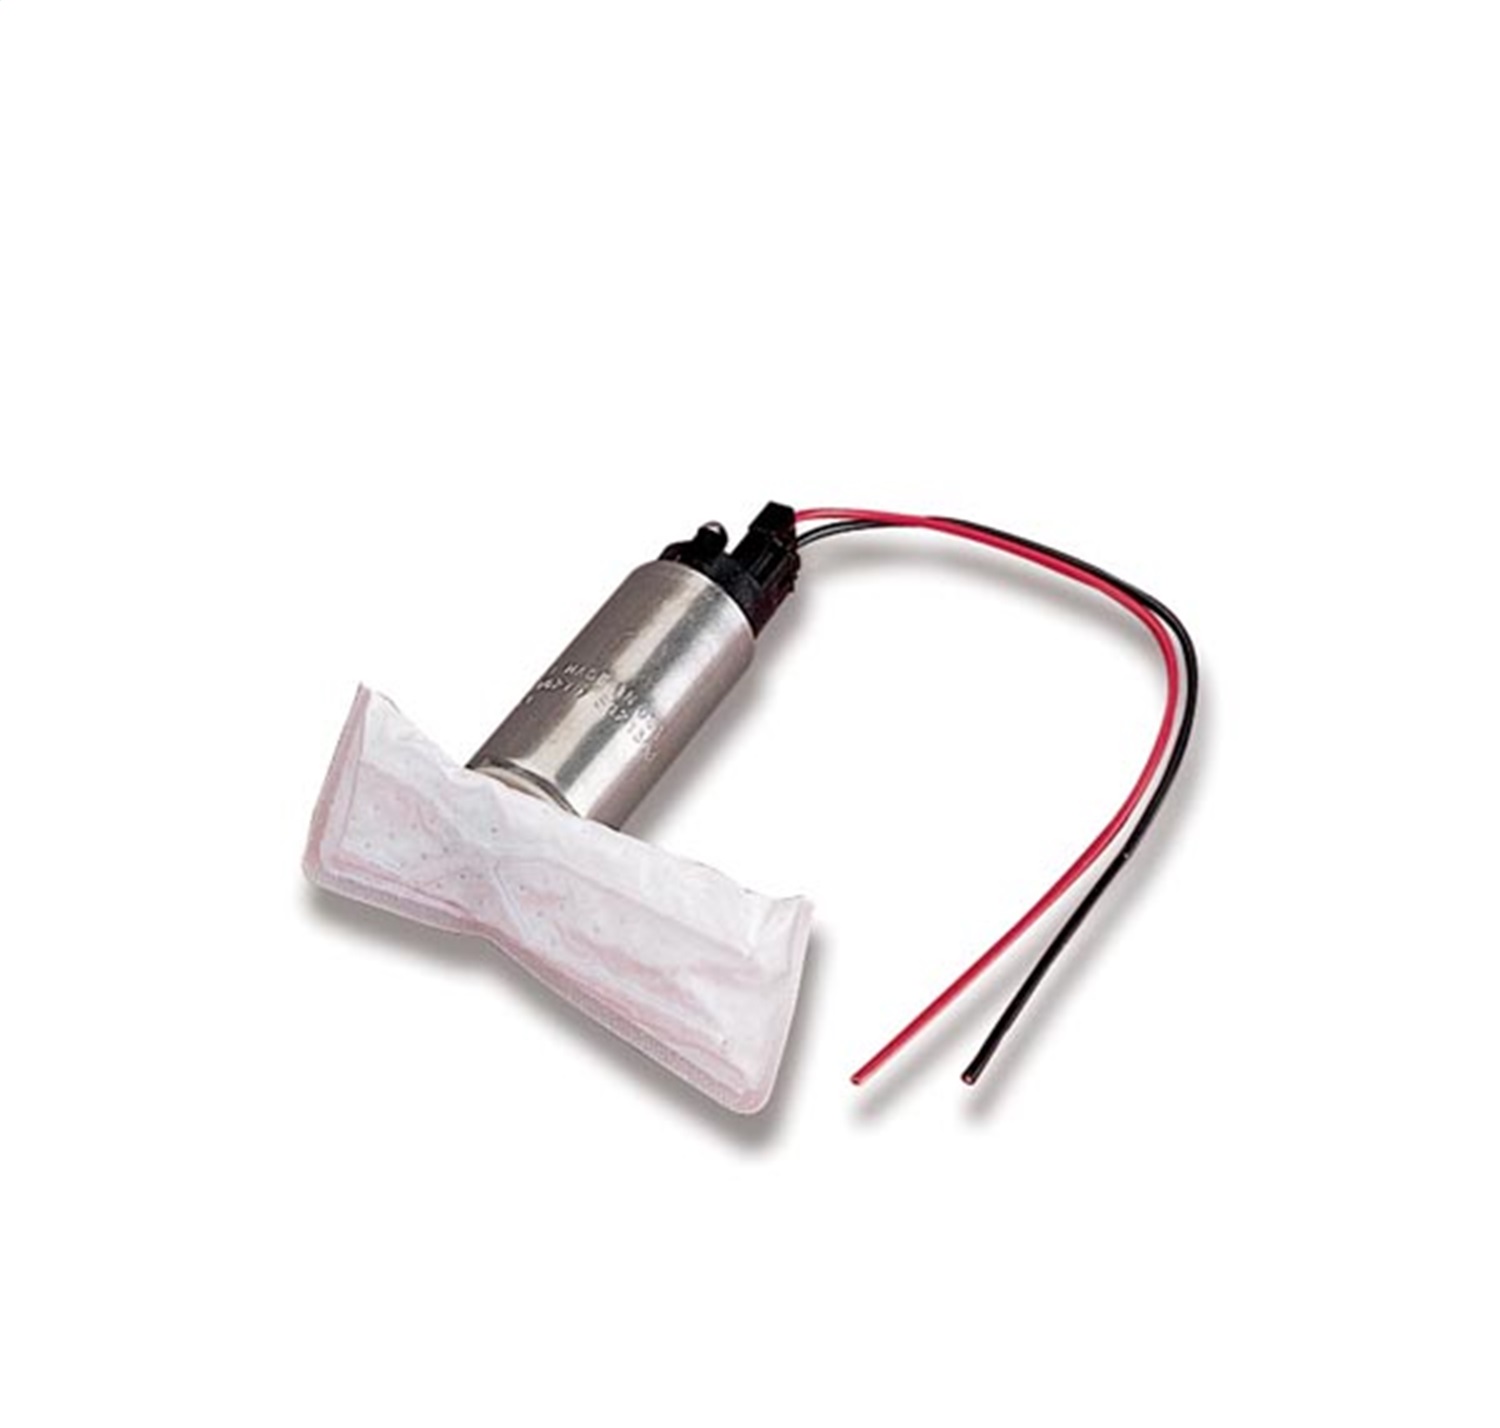 Holley Performance Holley Performance 12-912 Electric Fuel Pump; In-Tank Electric Fuel Pump